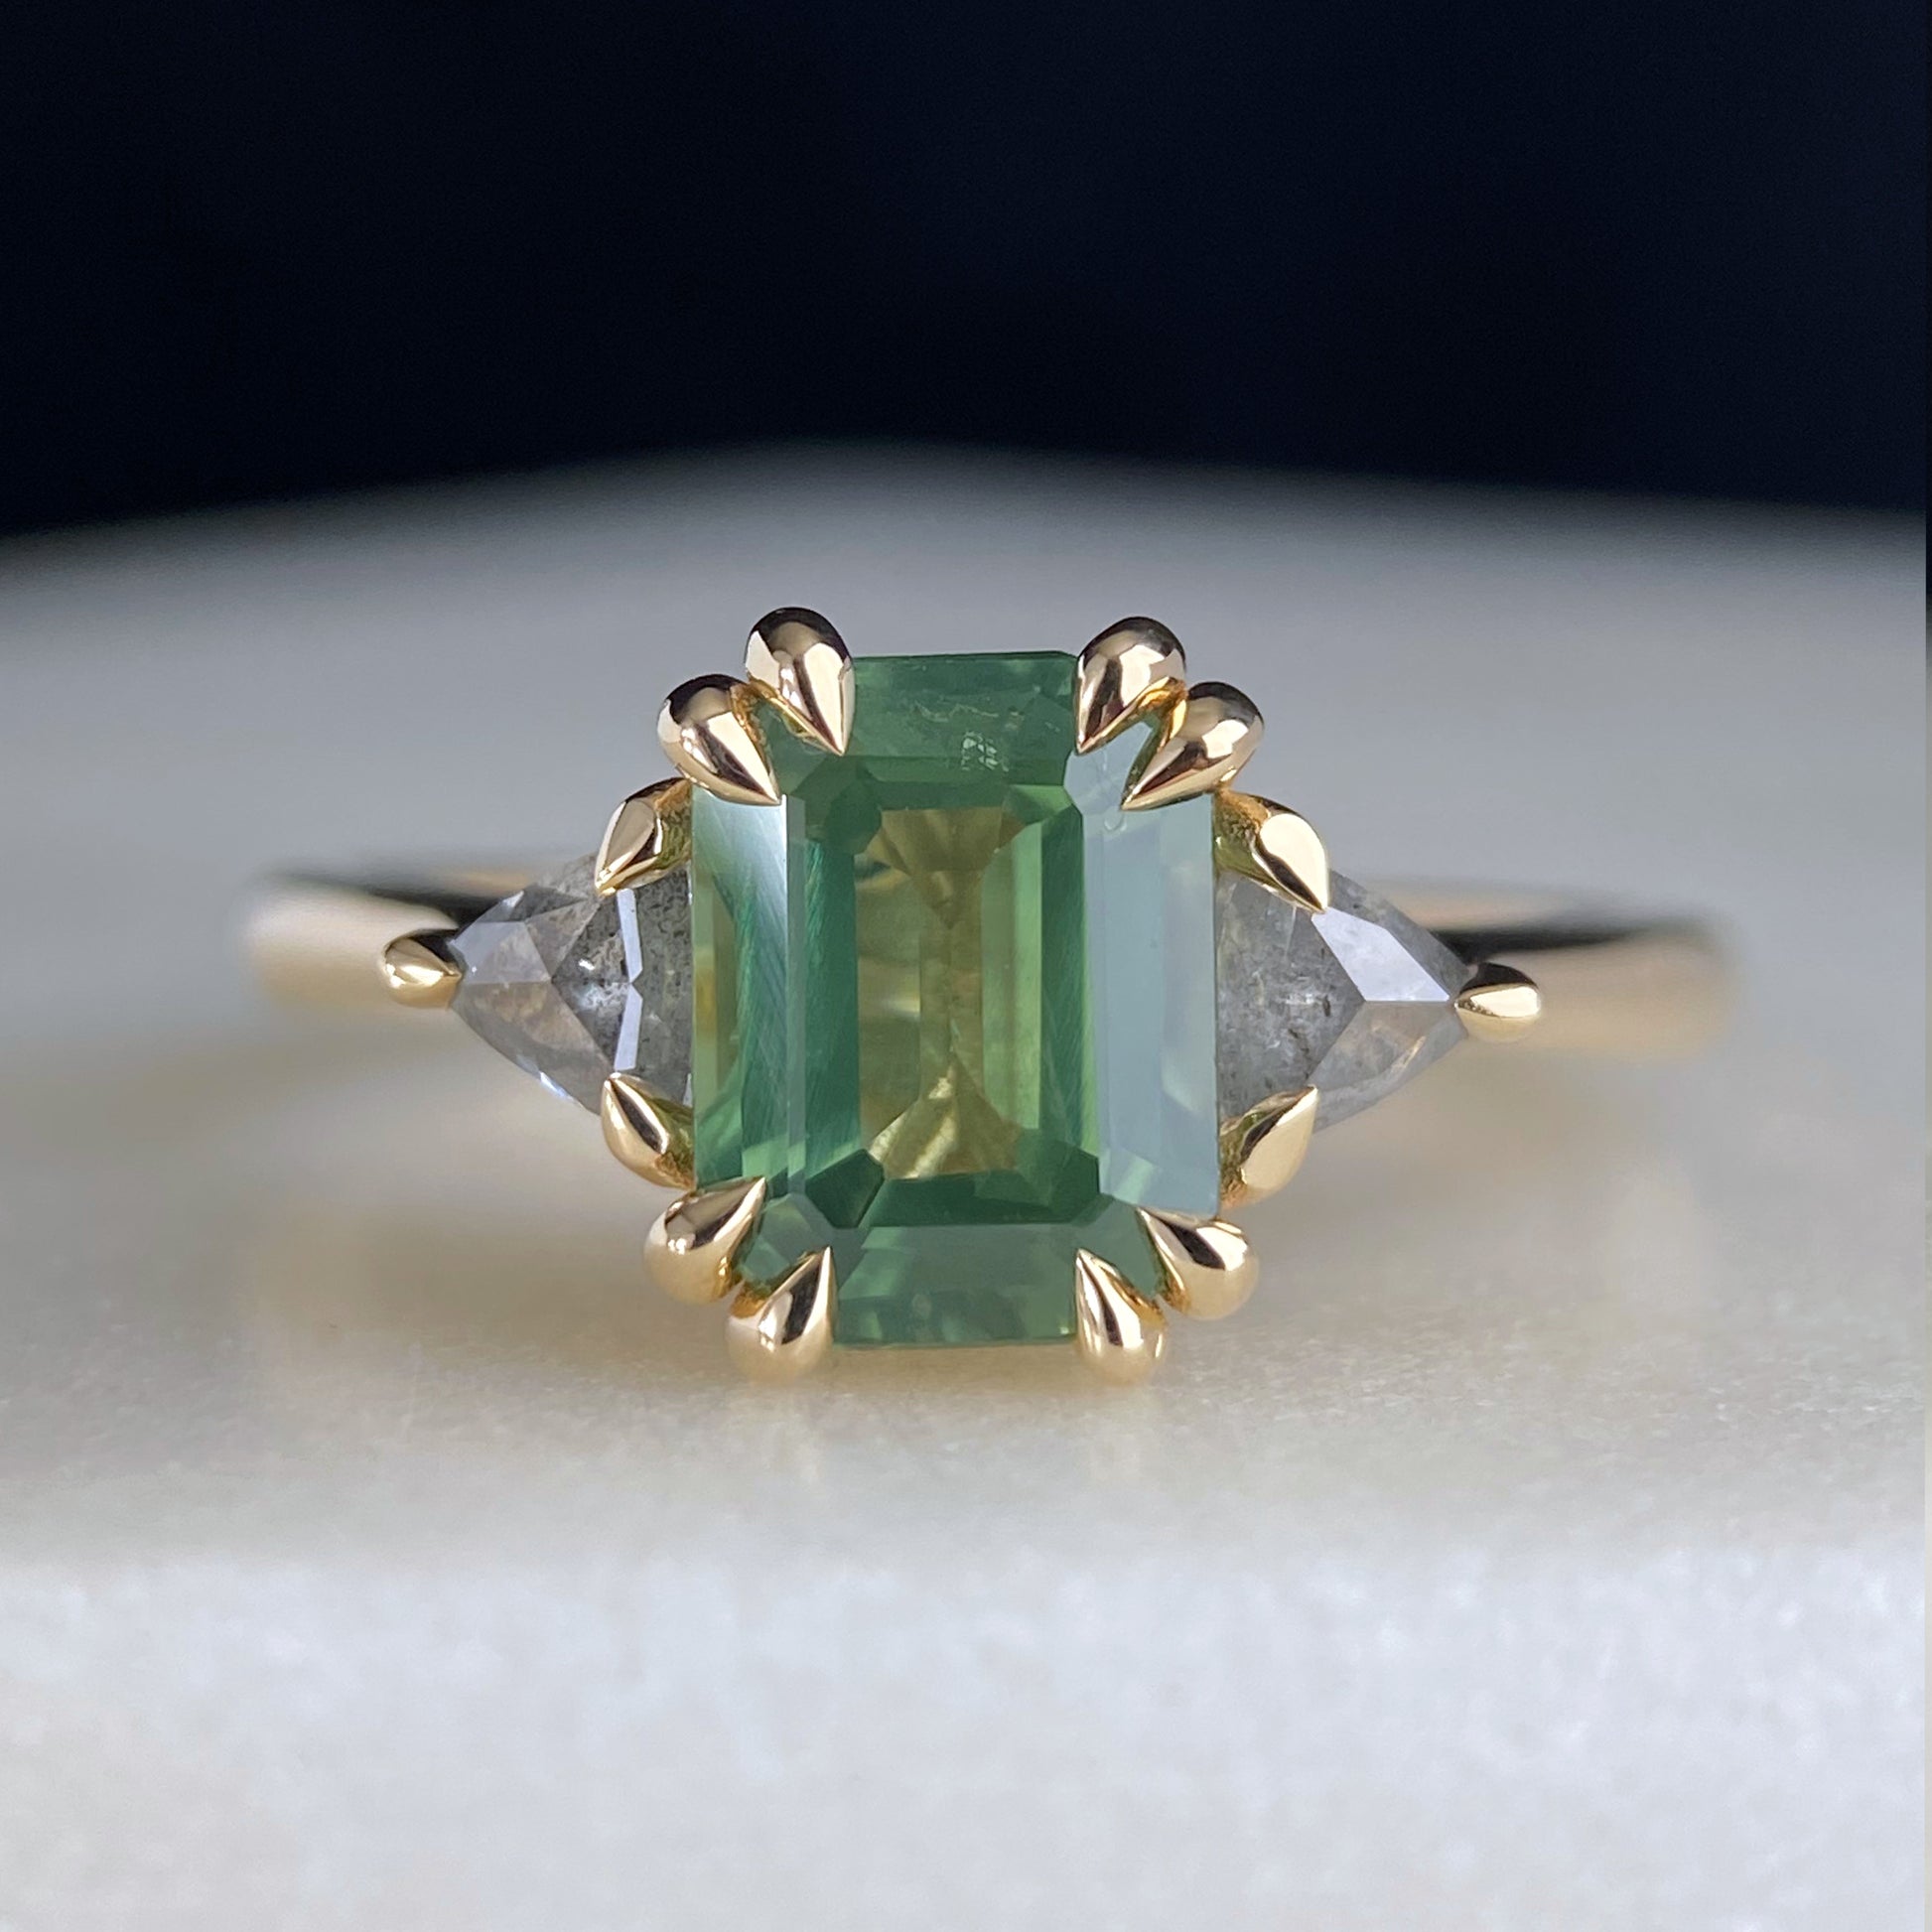 Emerald Cut Australian Green Sapphire with Salt and Pepper Trillion Diamond Accents Double Claw Engagement Ring 14K yellow gold